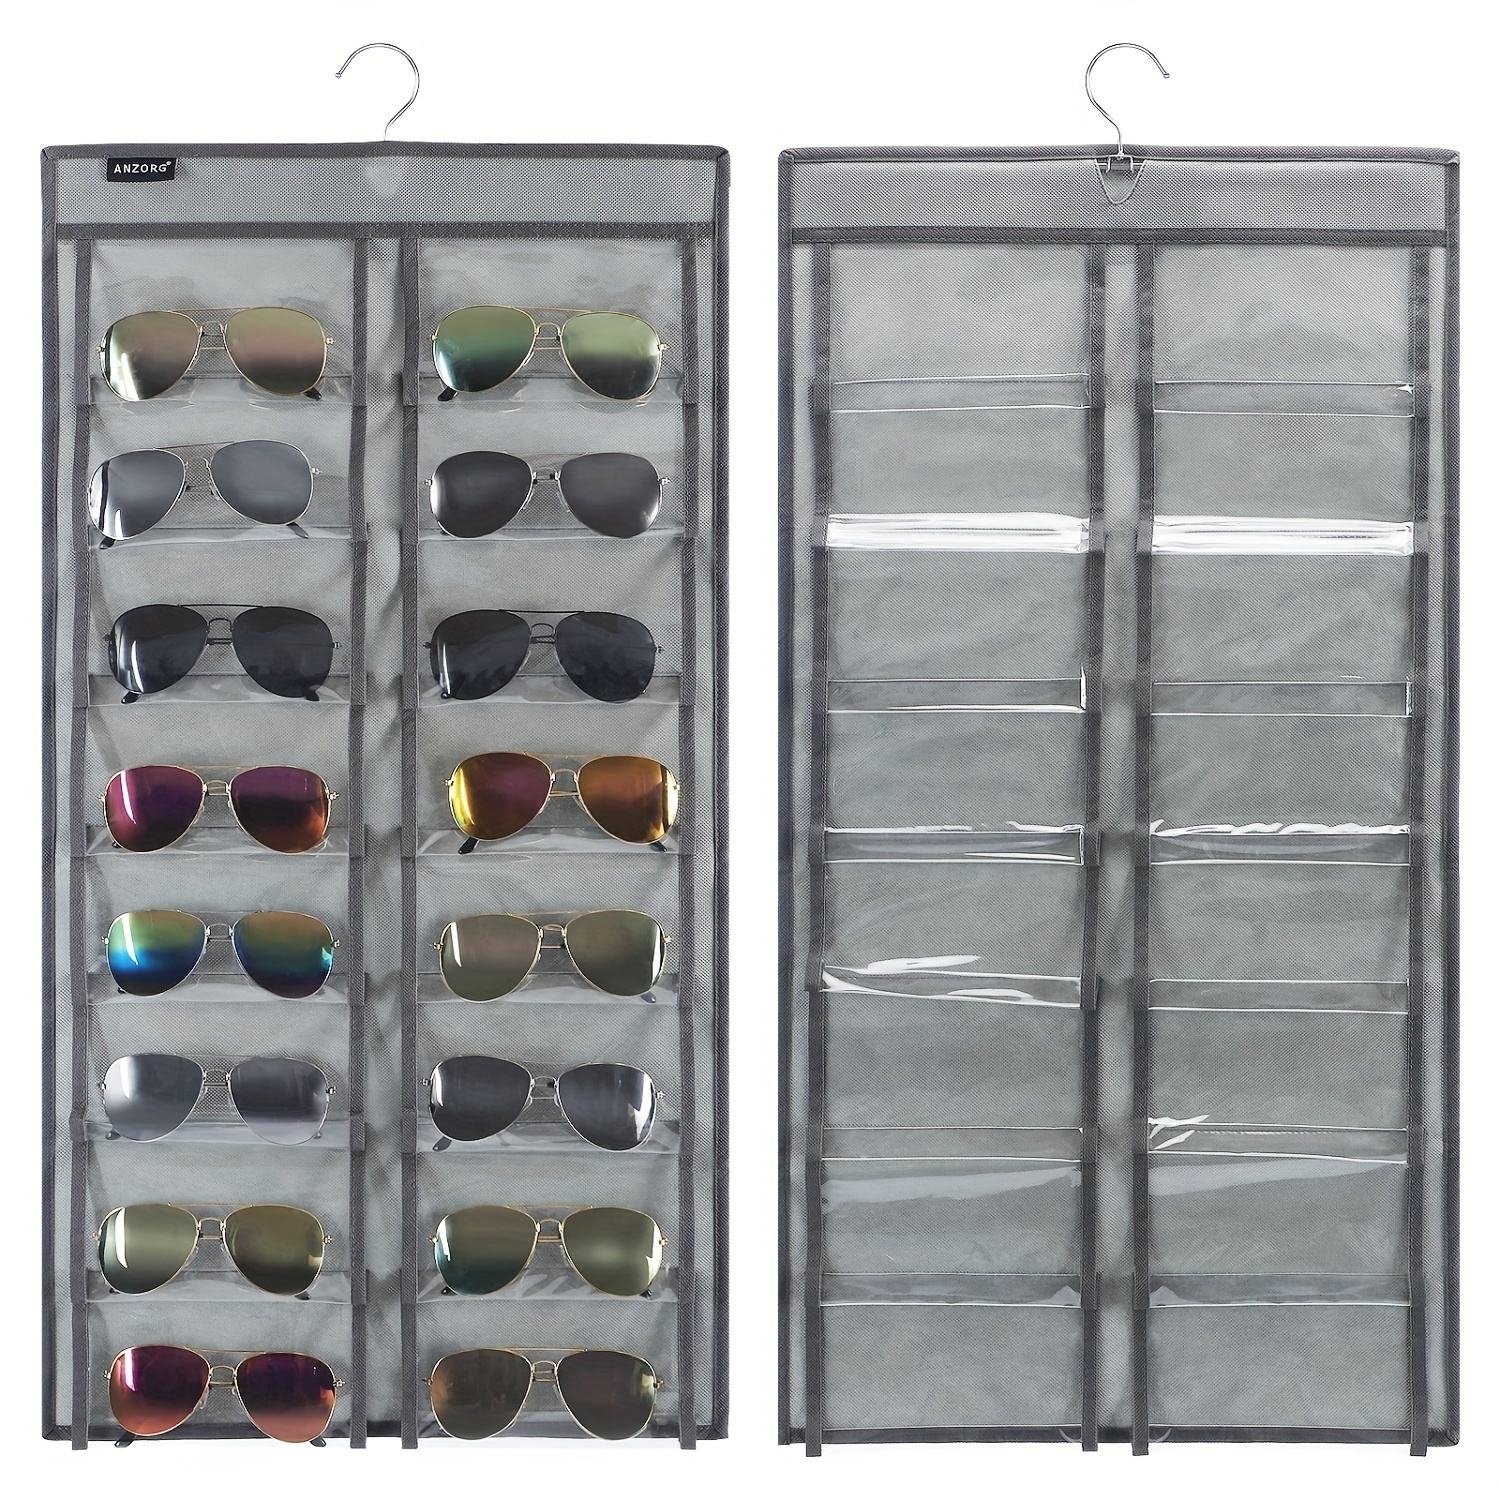 

1 Pc Dual Sided Hanging Sunglasses Organizer Wall Eyeglass Holder Sunglass Rack For Home With 32 Dust Proof Pockets